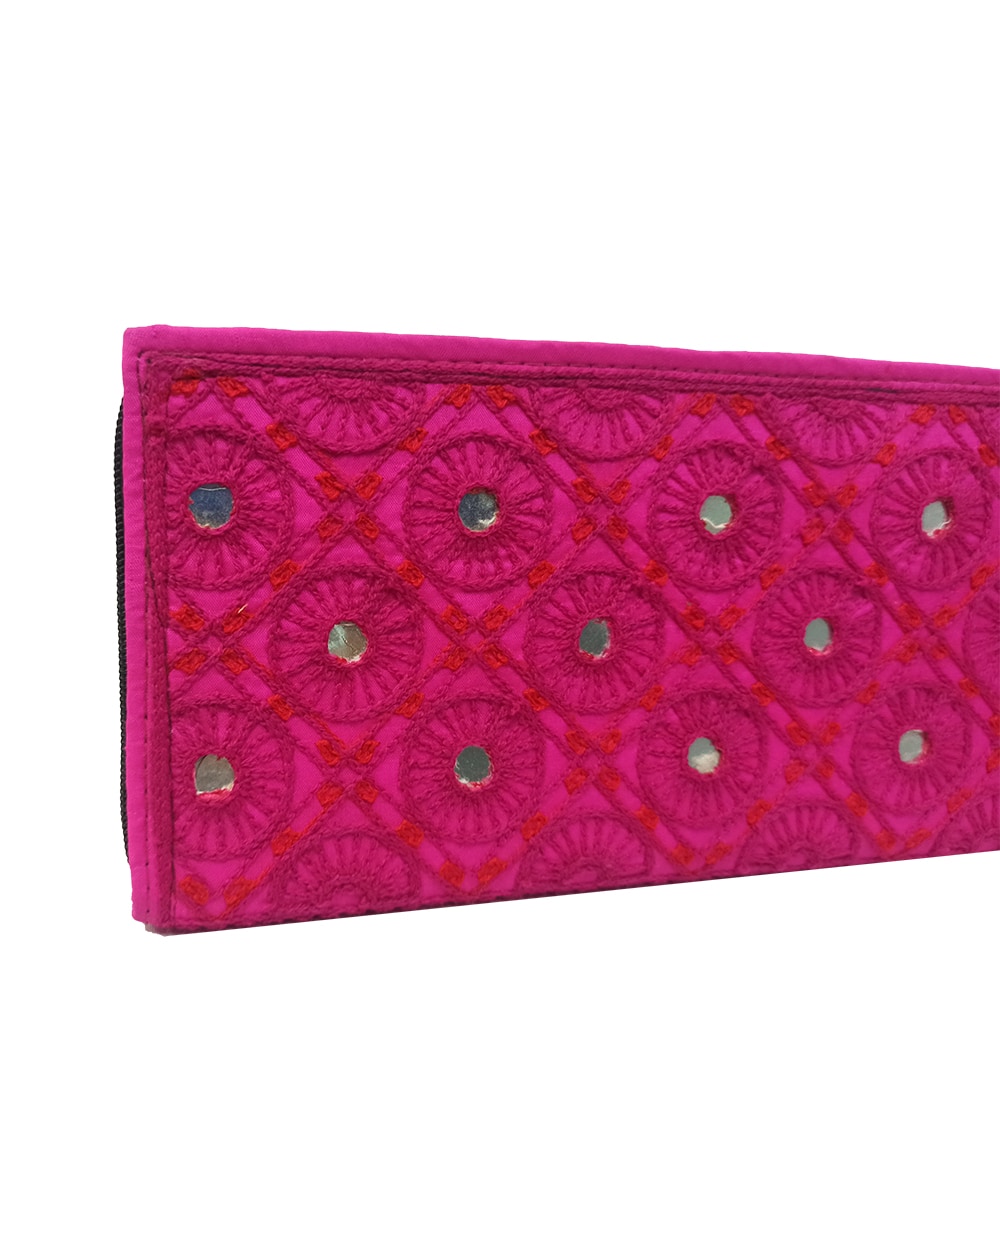 pink-embroidered-purse-2